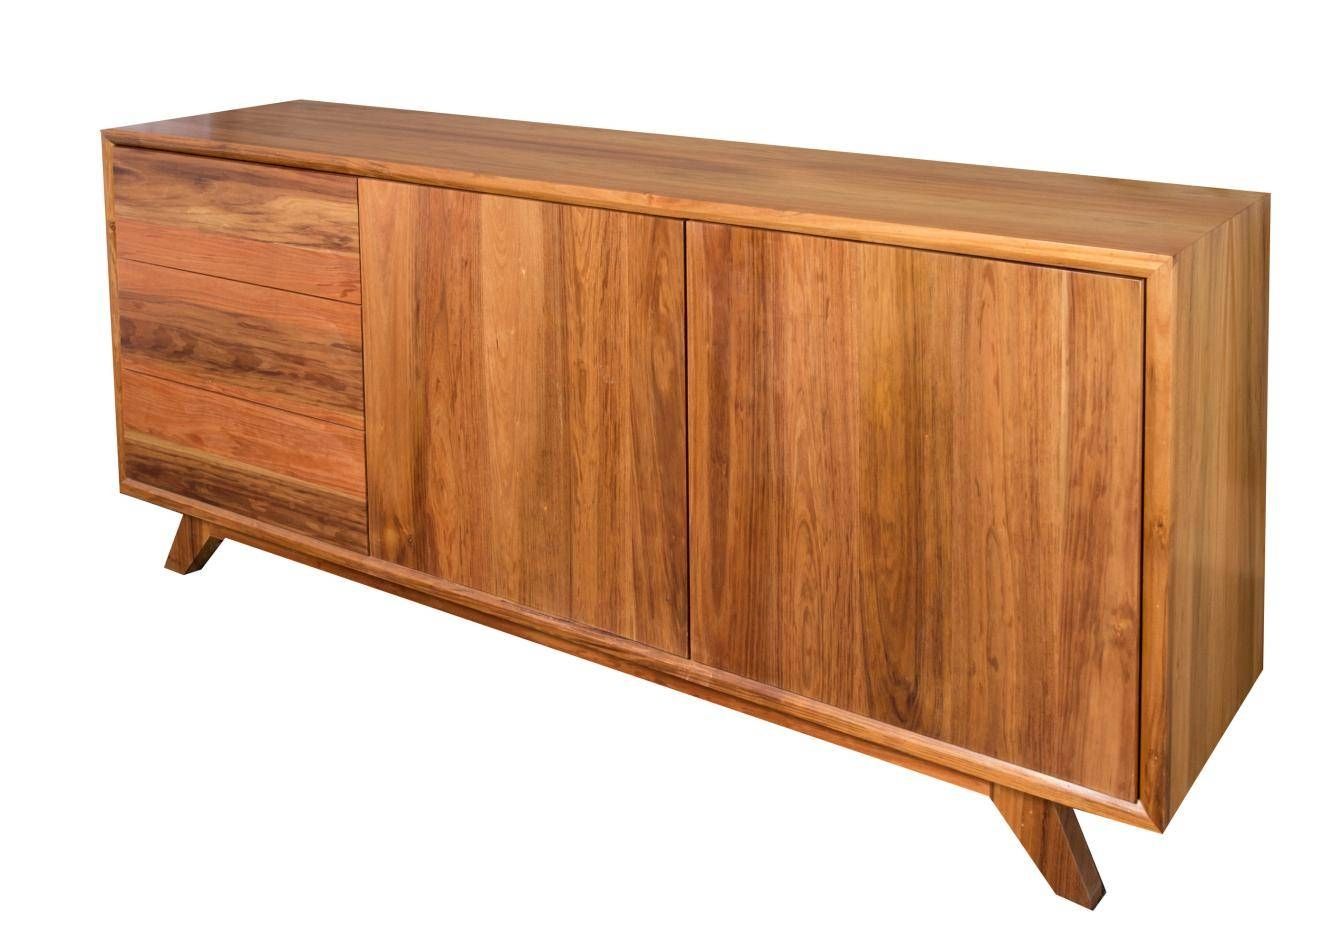 Melbourne – Australian Made Blackwood Timber Retro Buffet Pertaining To Retro Buffet Sideboards (Photo 1 of 15)